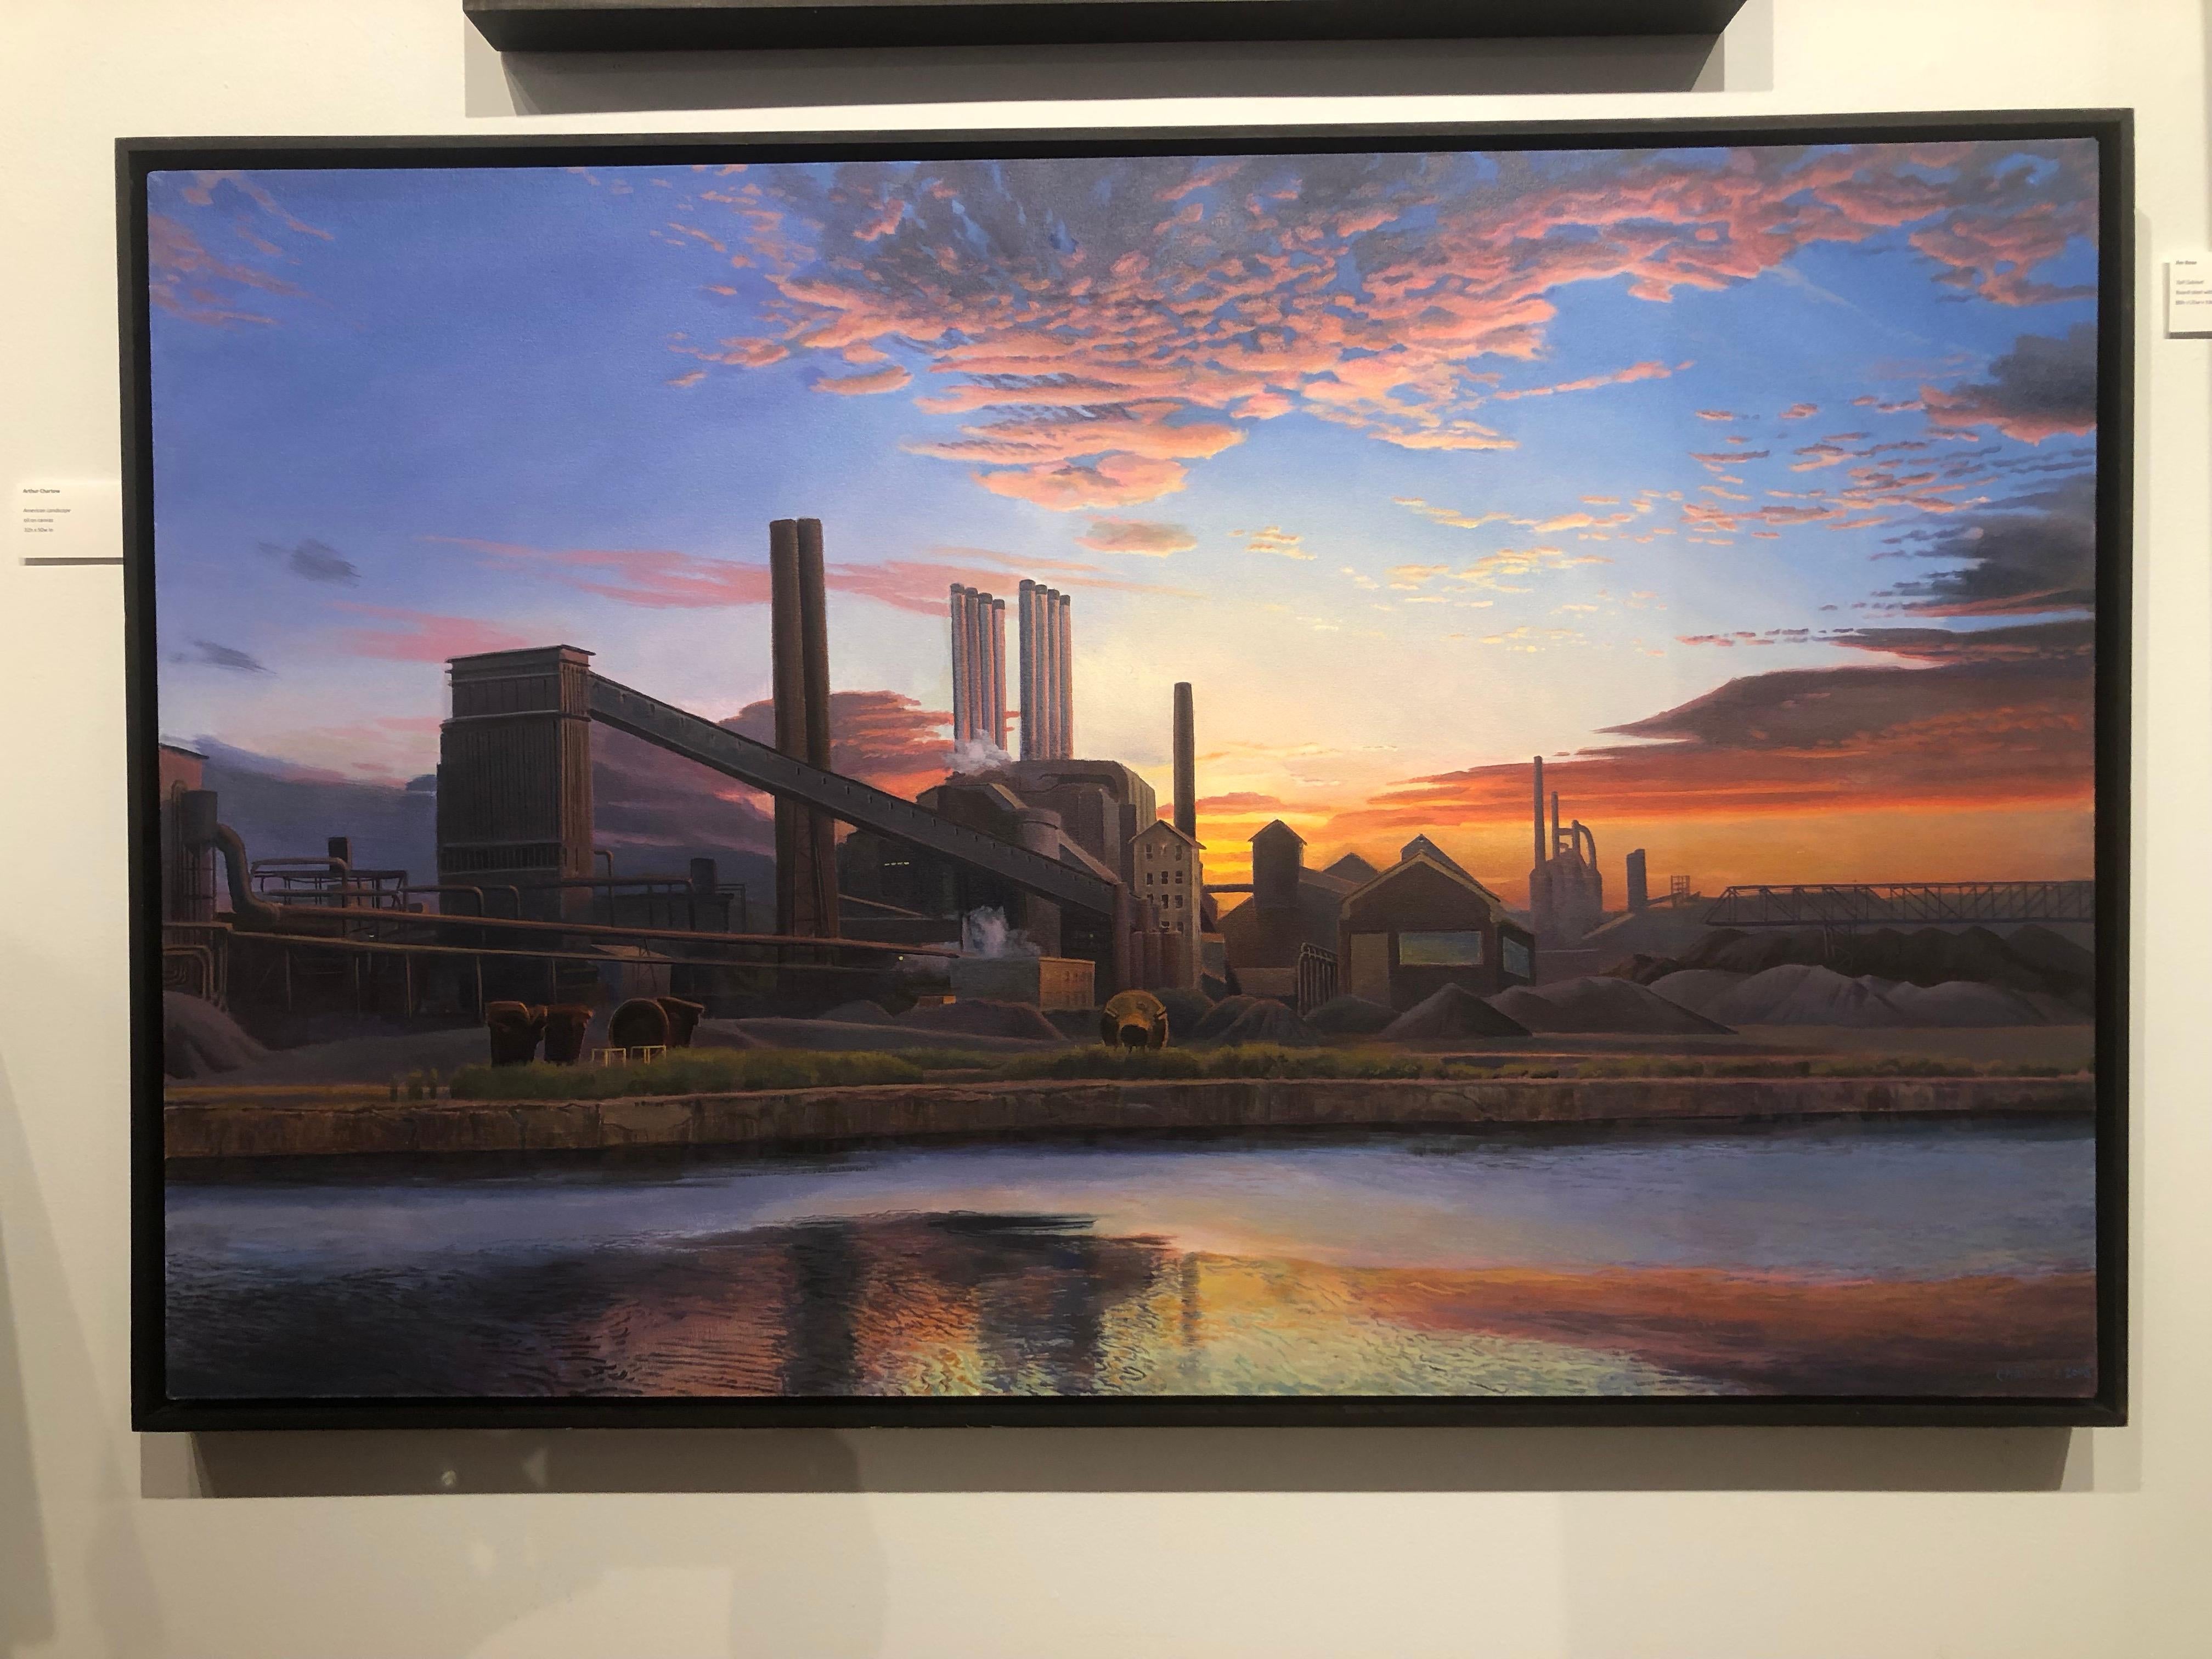 American Landscape - Iconic American Steel Mill Bathed in Orange Sunset Light - Painting by Art Chartow